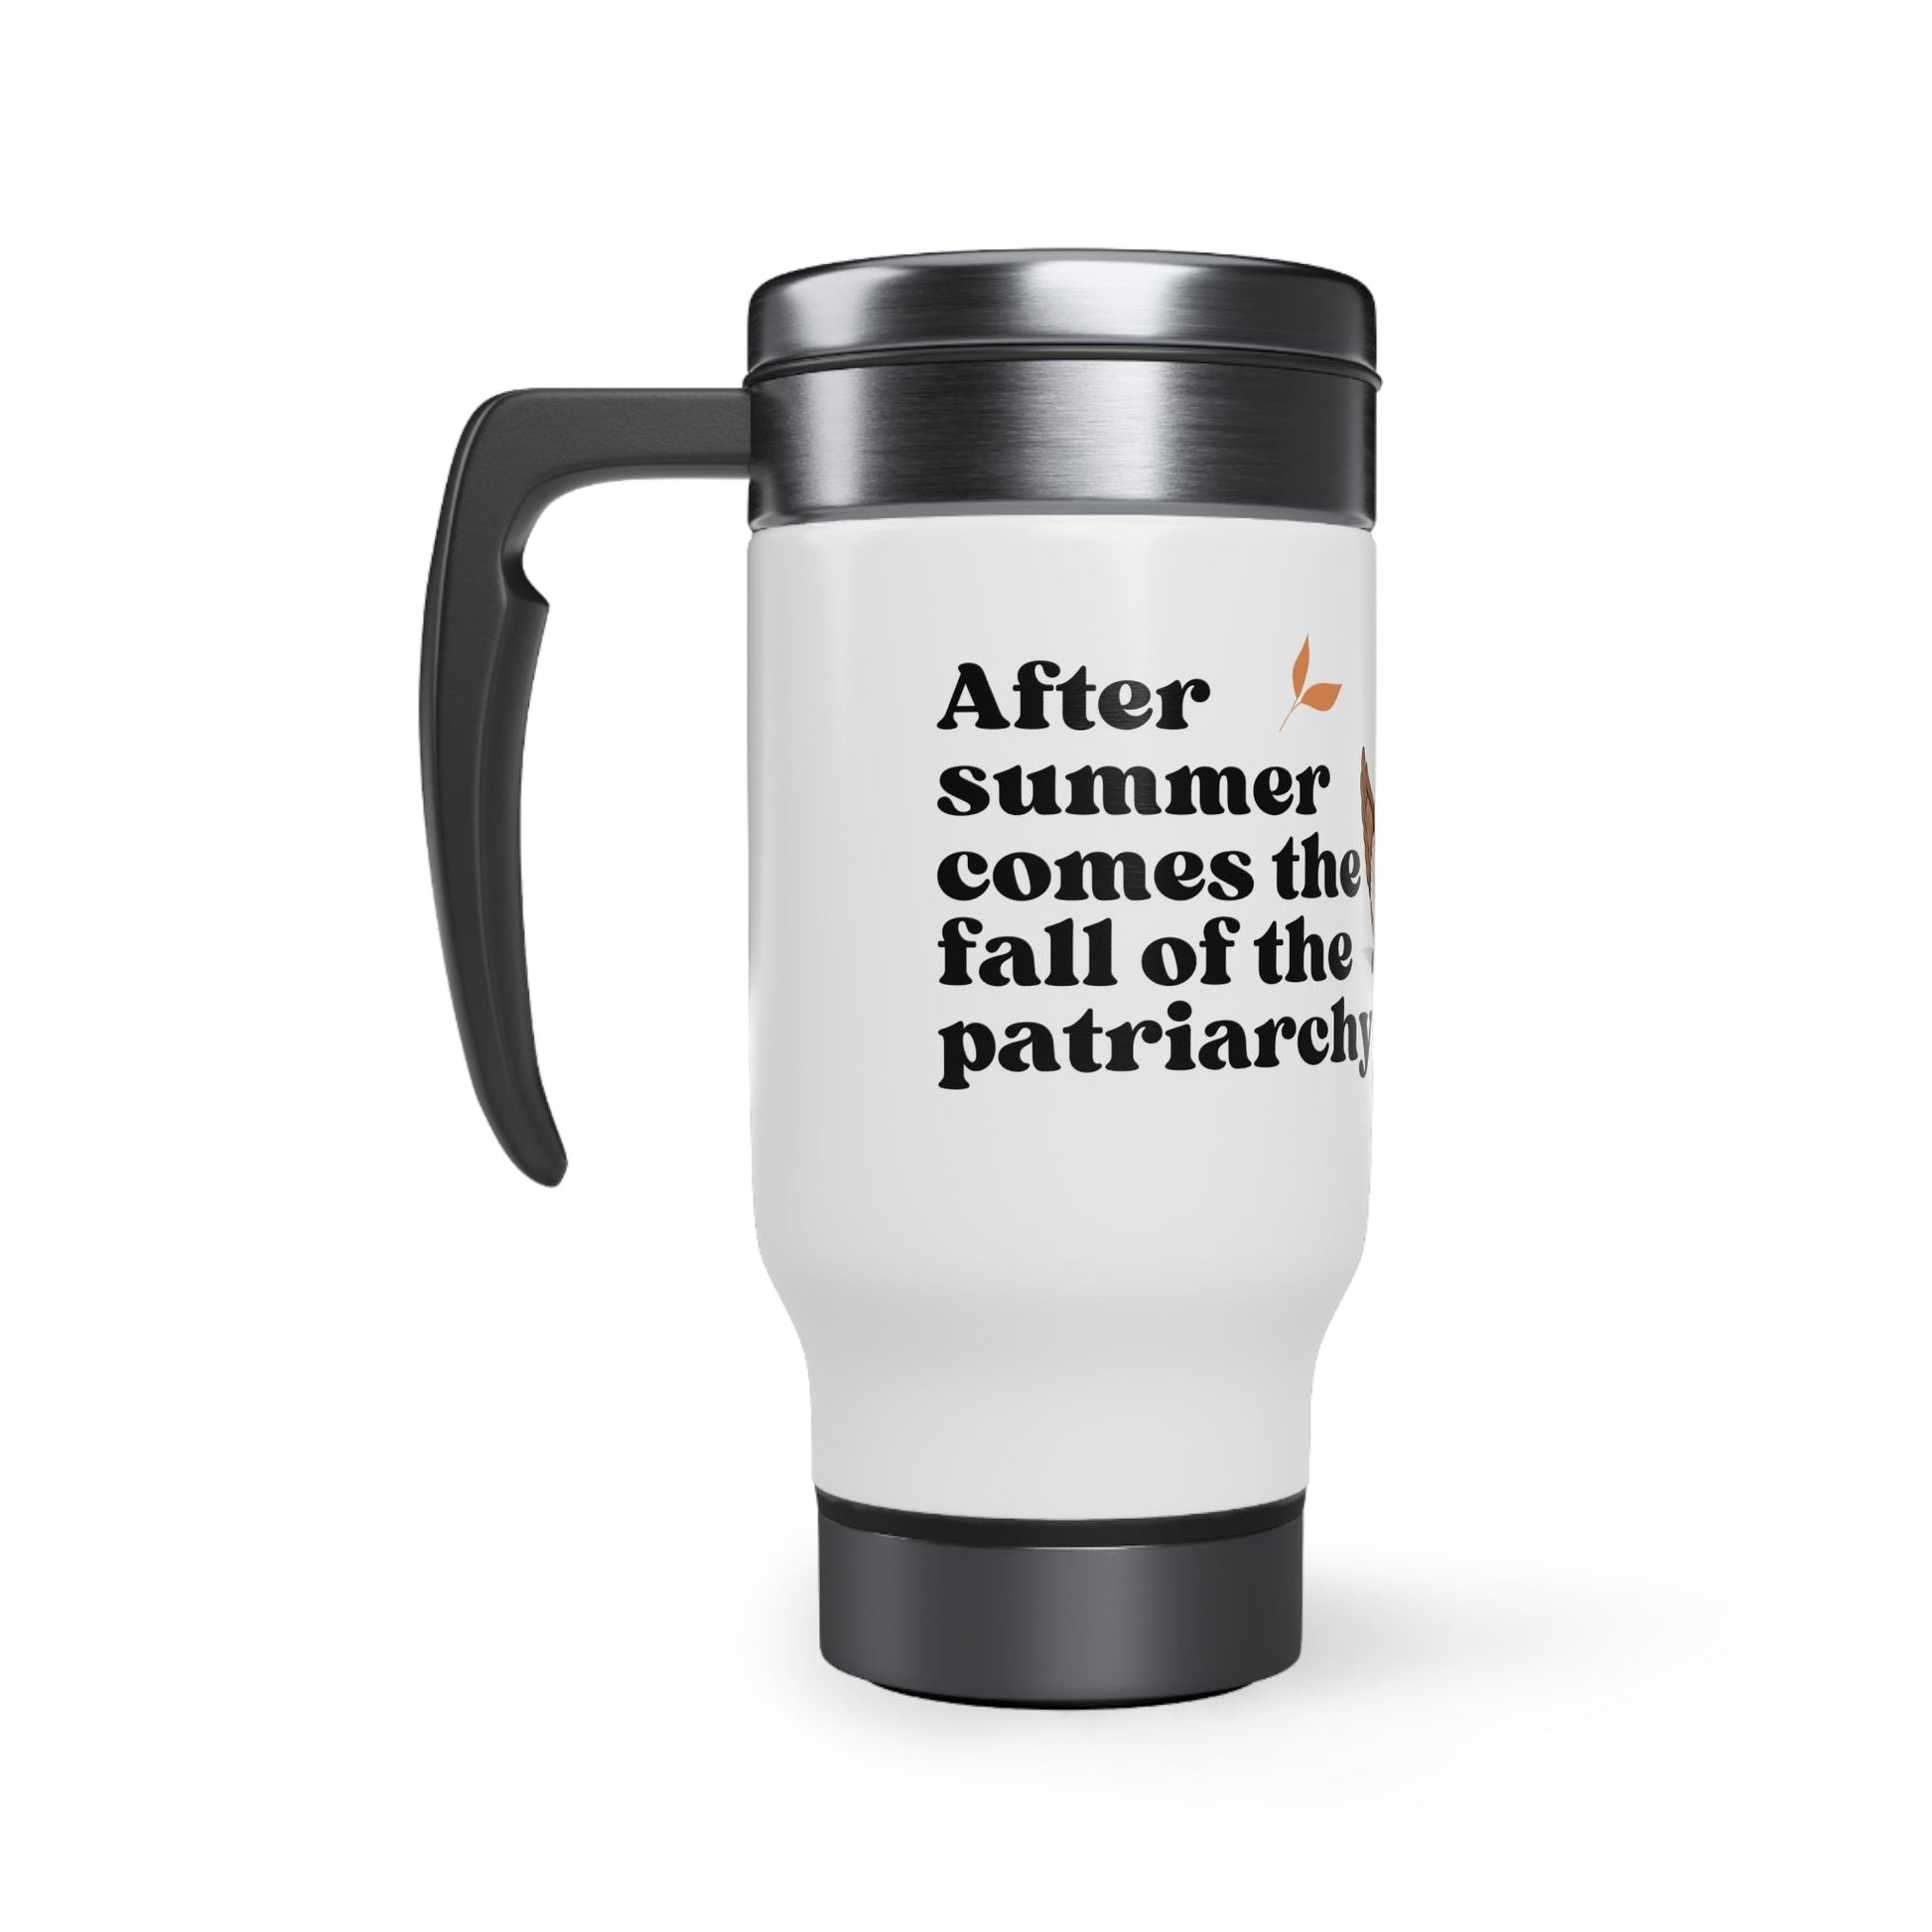 After Summer Comes the Fall of the Patriarchy Feminist Stainless Steel Travel Mug with Handle, 14oz